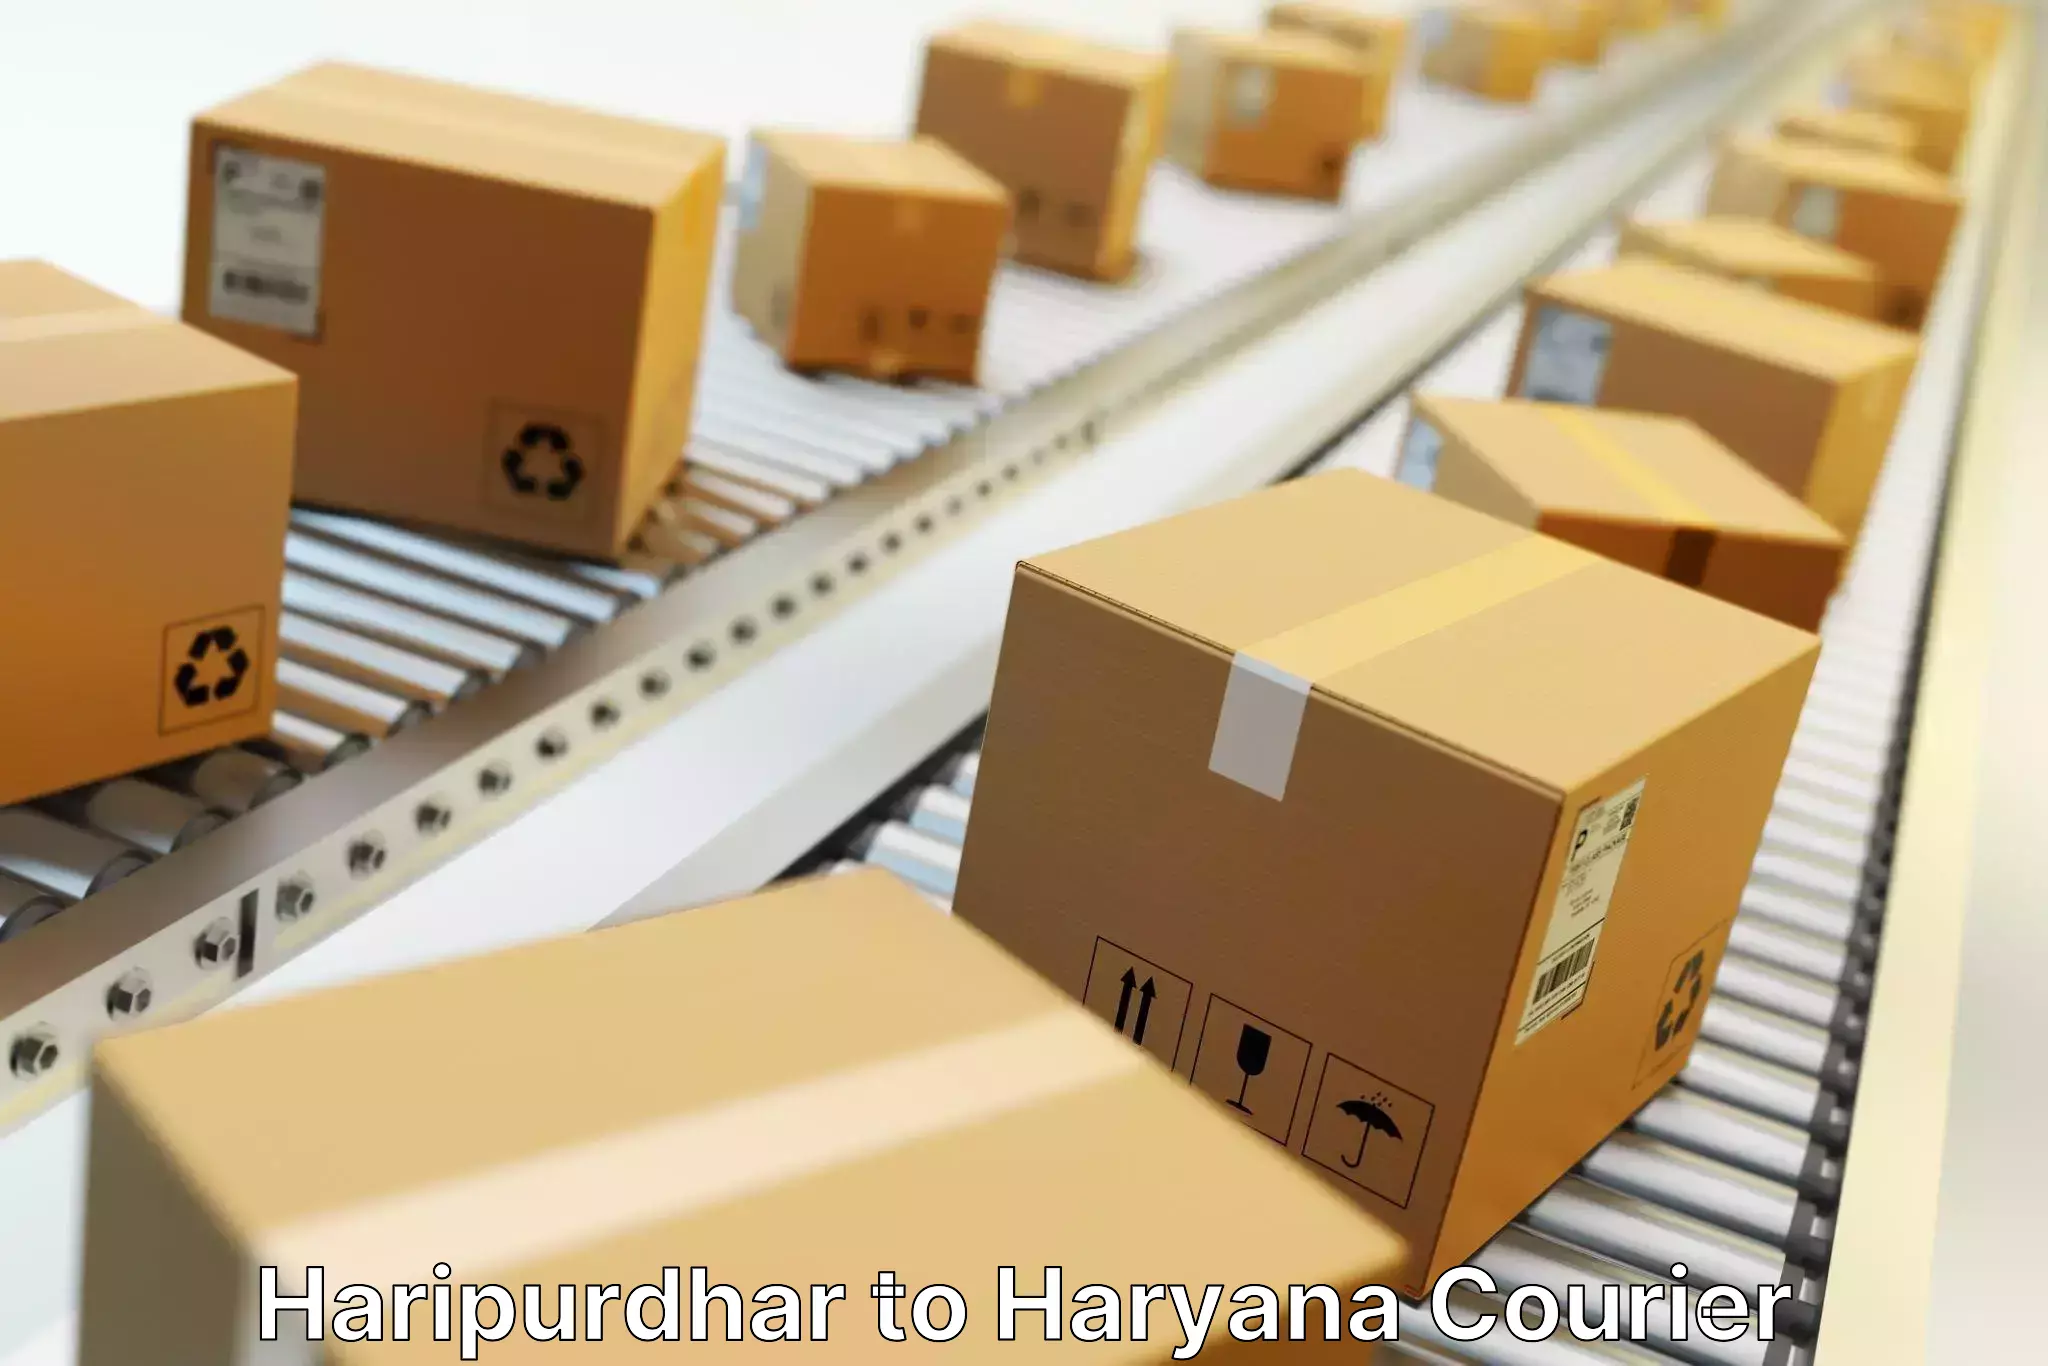 Easy access courier services in Haripurdhar to Haryana